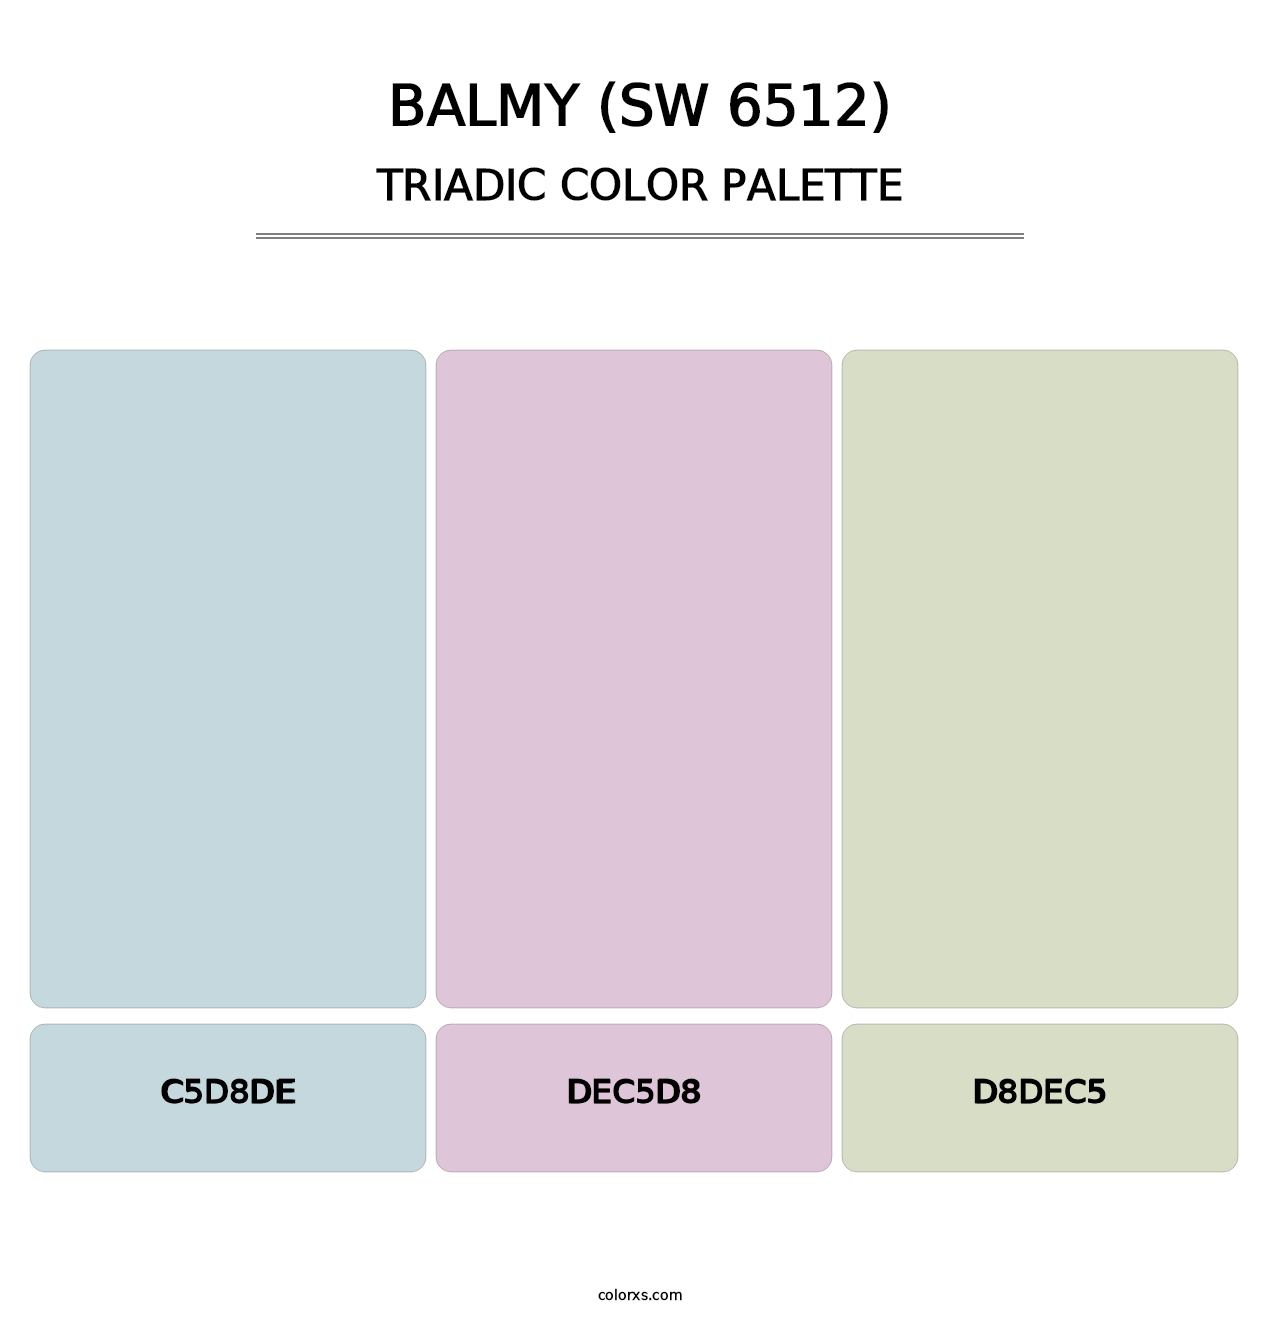 Balmy (SW 6512) - Triadic Color Palette